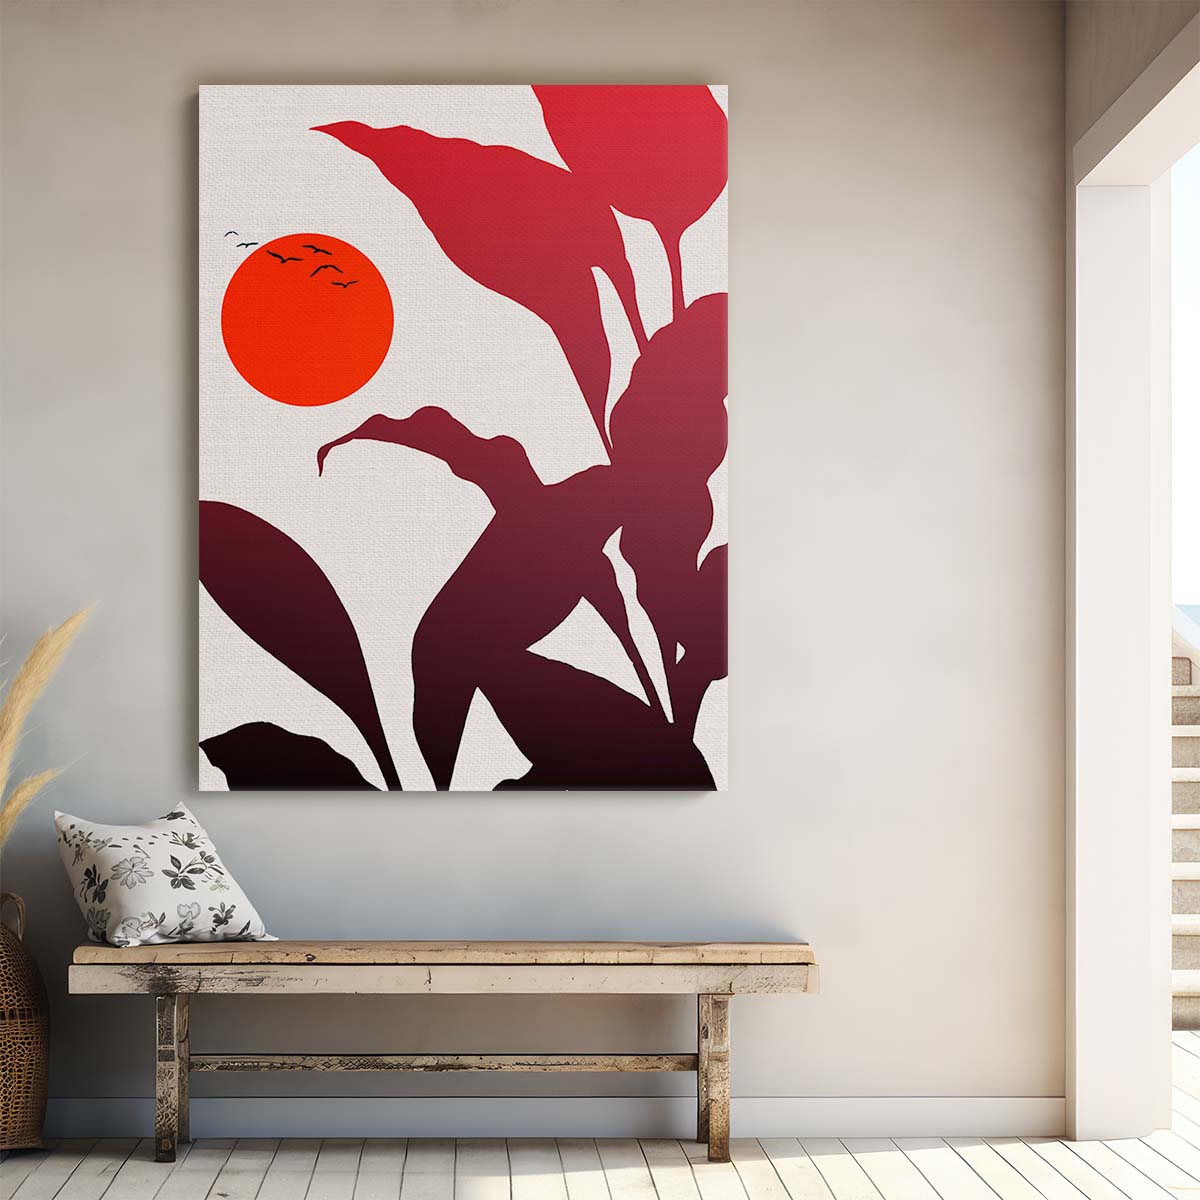 Exotic Tropical Sunset Illustration with Birds and Botanical Elements by Luxuriance Designs, made in USA